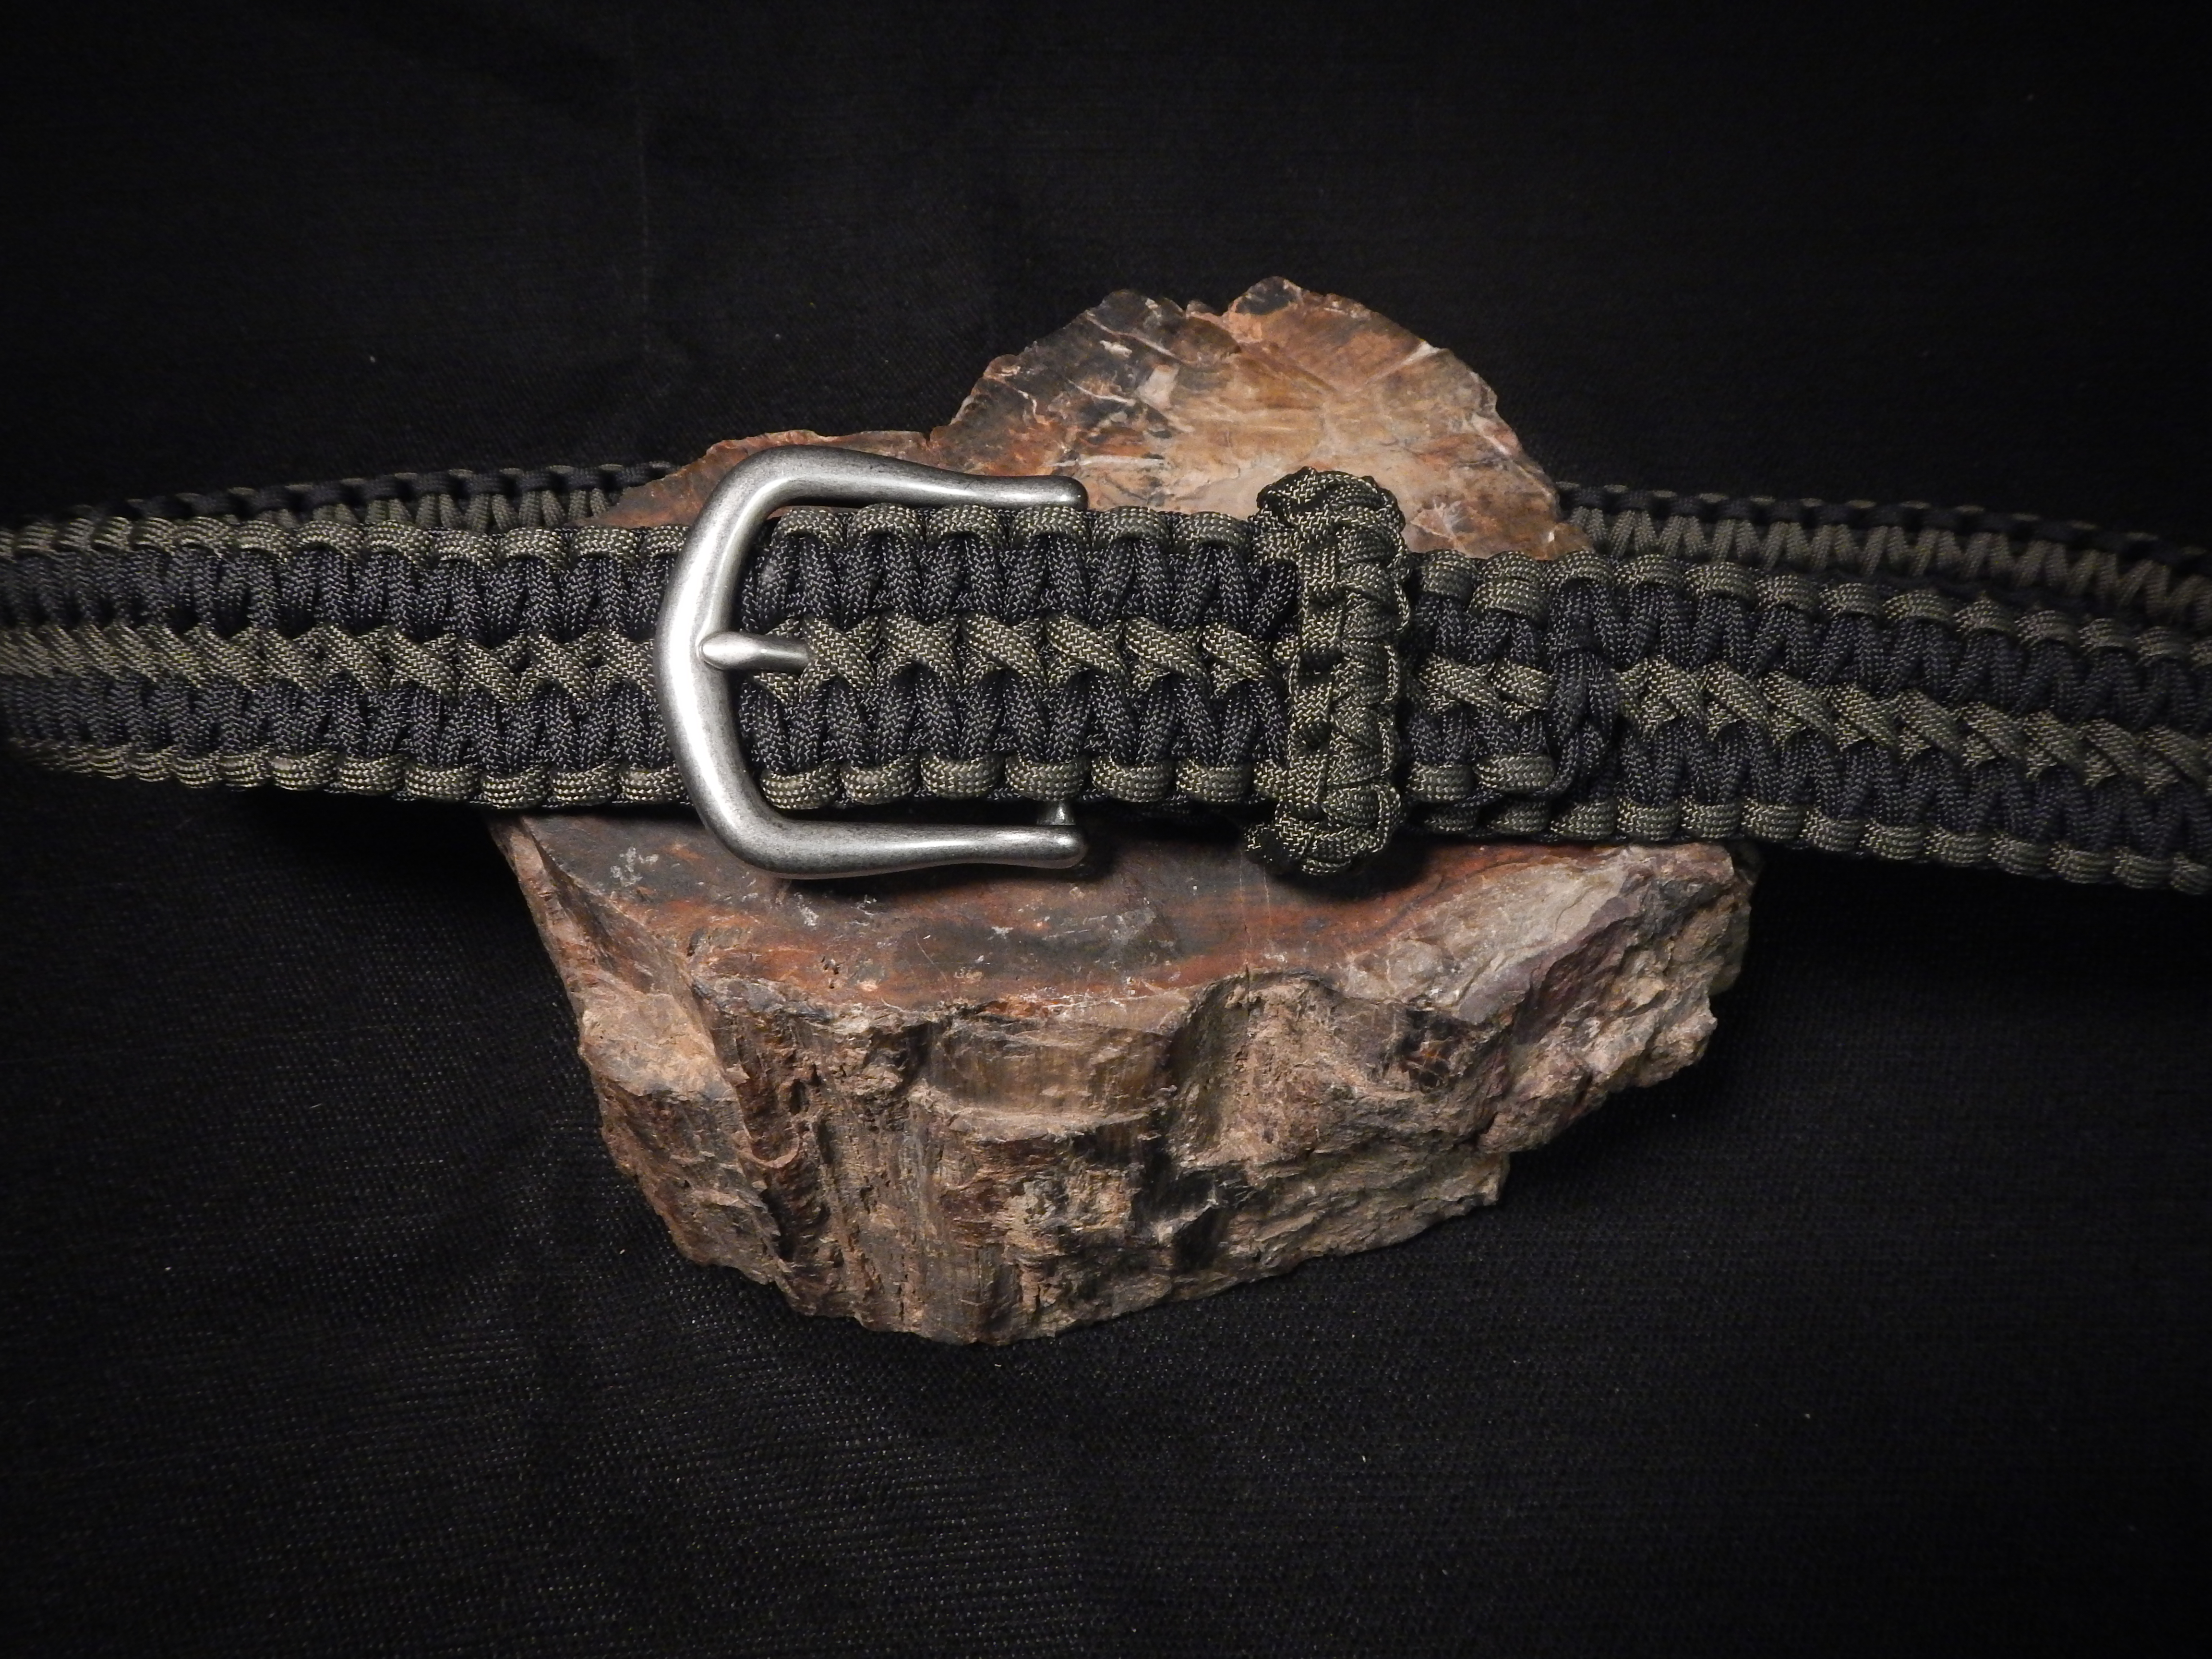 ParaLace EDC Survival 550 Paracord Belt with Stainless Steel Buckle, 52 inch (Universal Fit, 3 Colors)